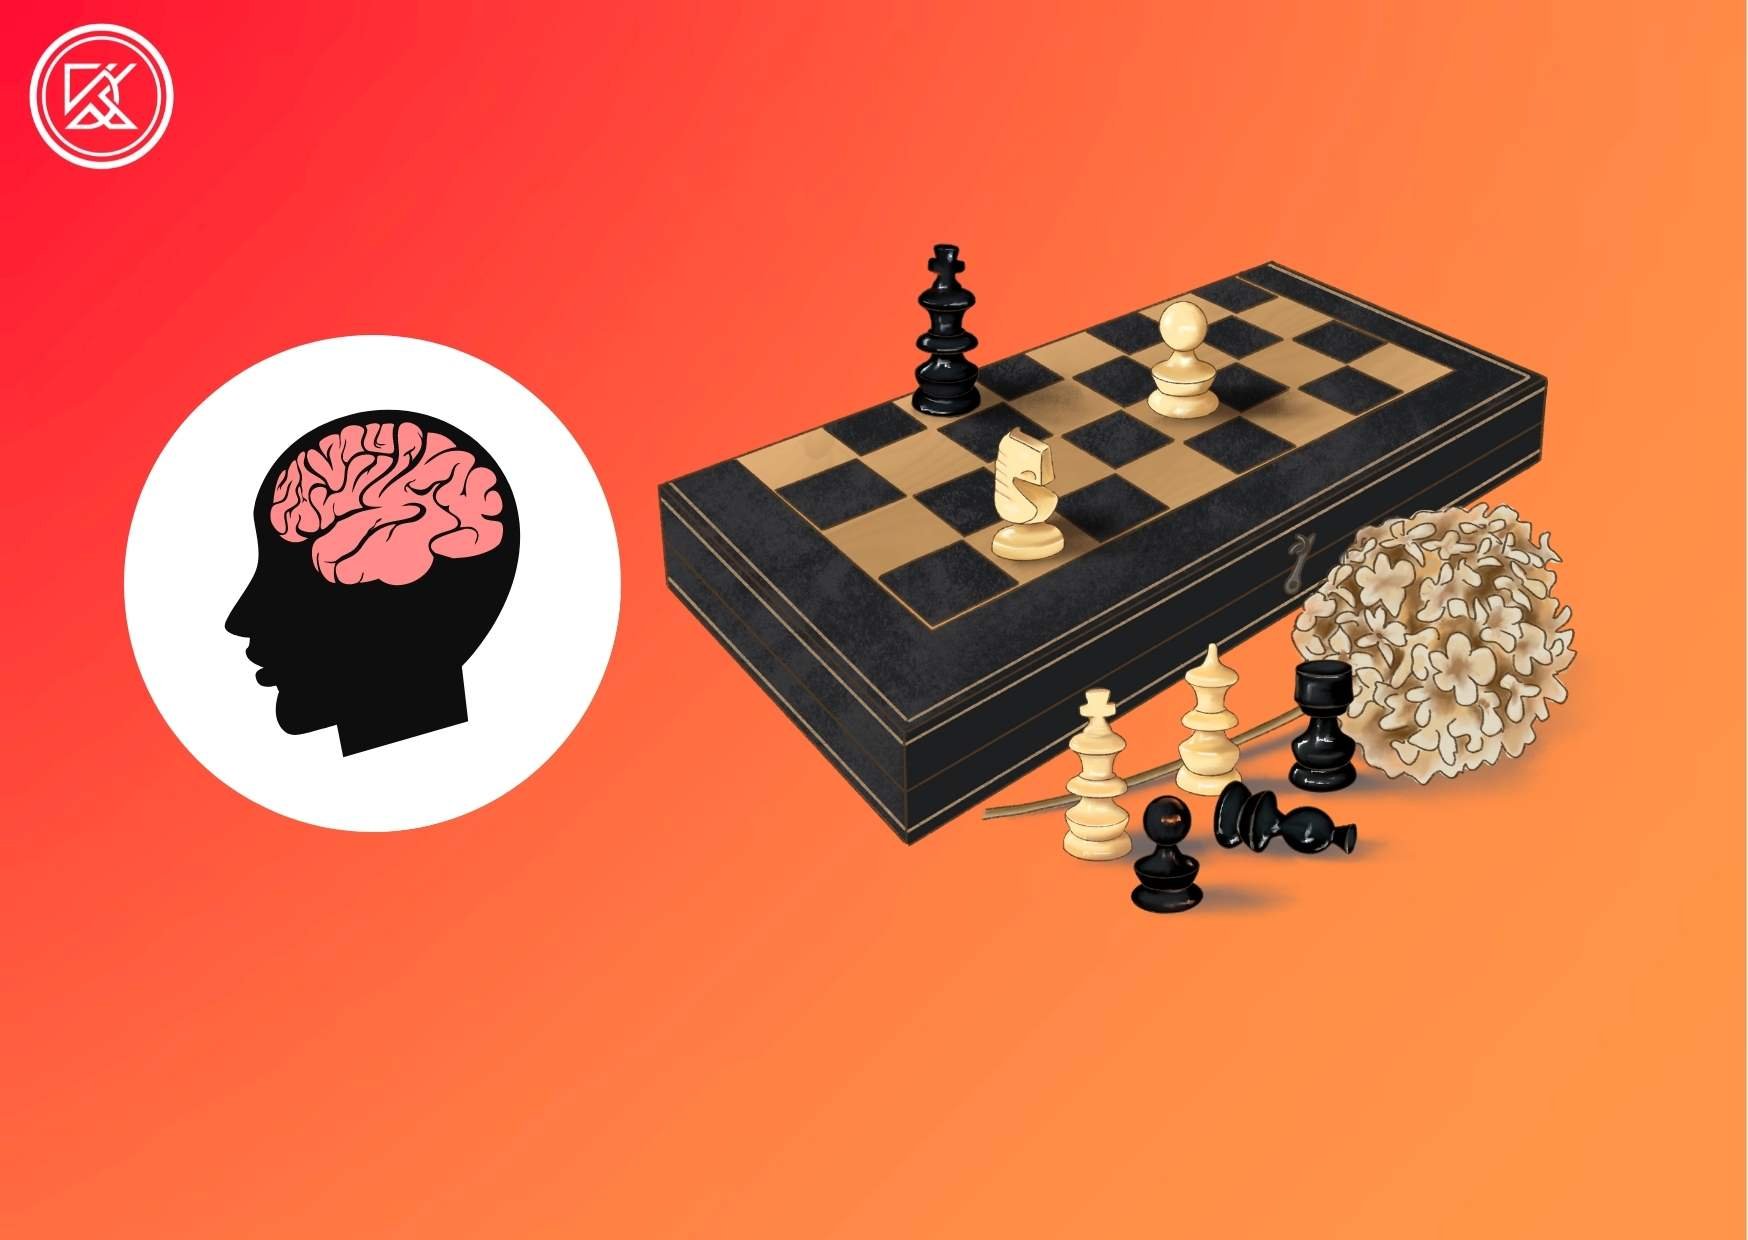 If I play chess everyday, will my IQ increase by 10 points? - Quora